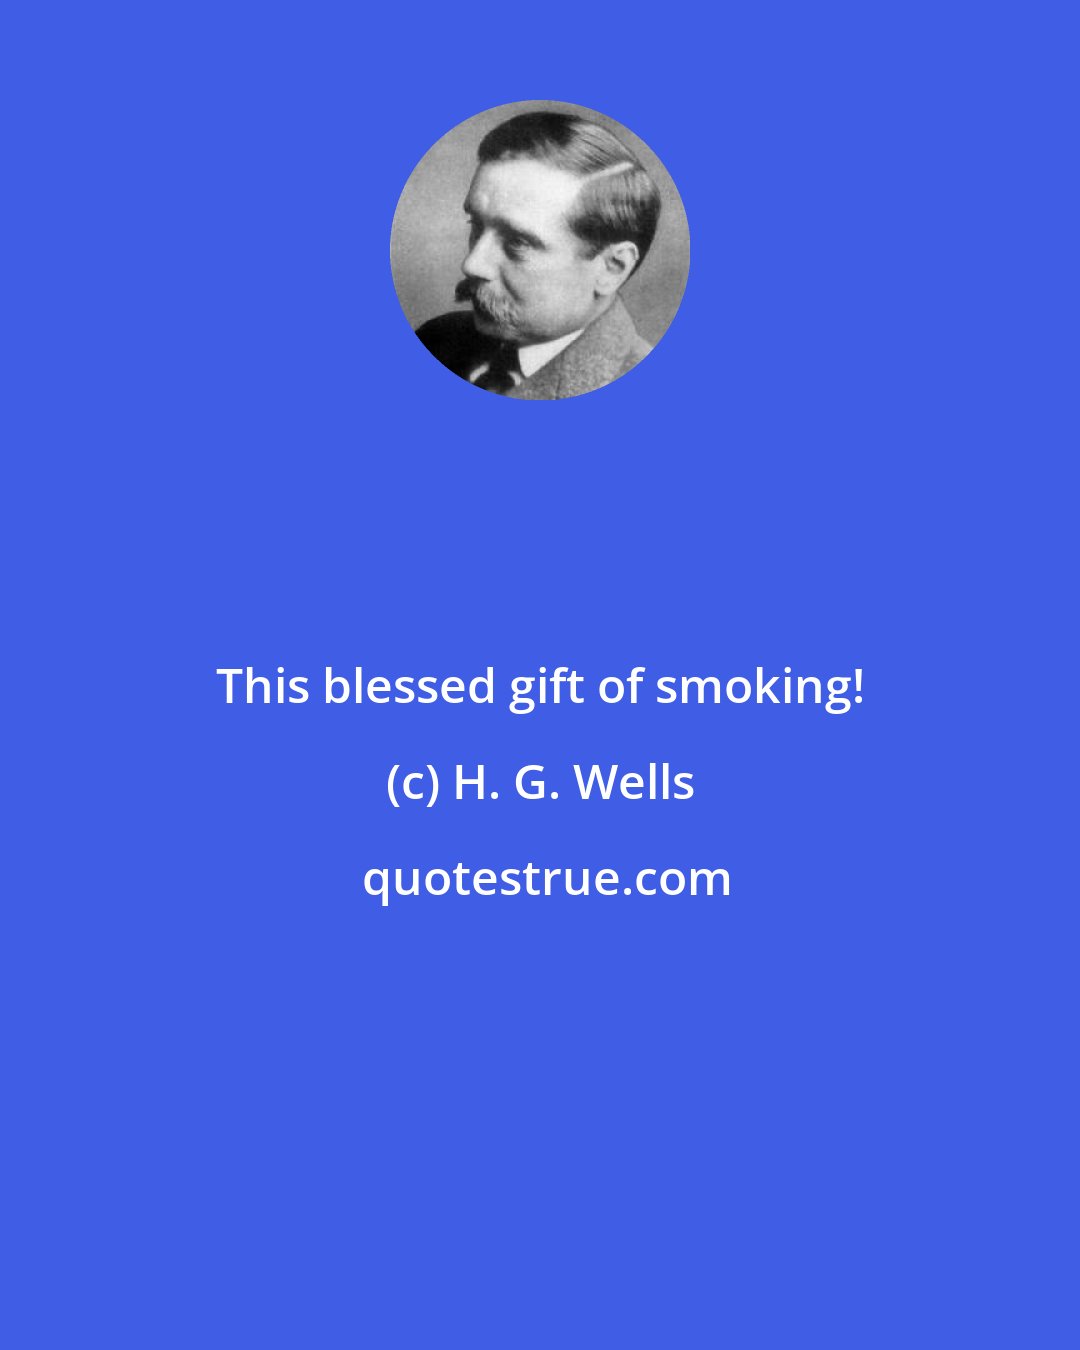 H. G. Wells: This blessed gift of smoking!